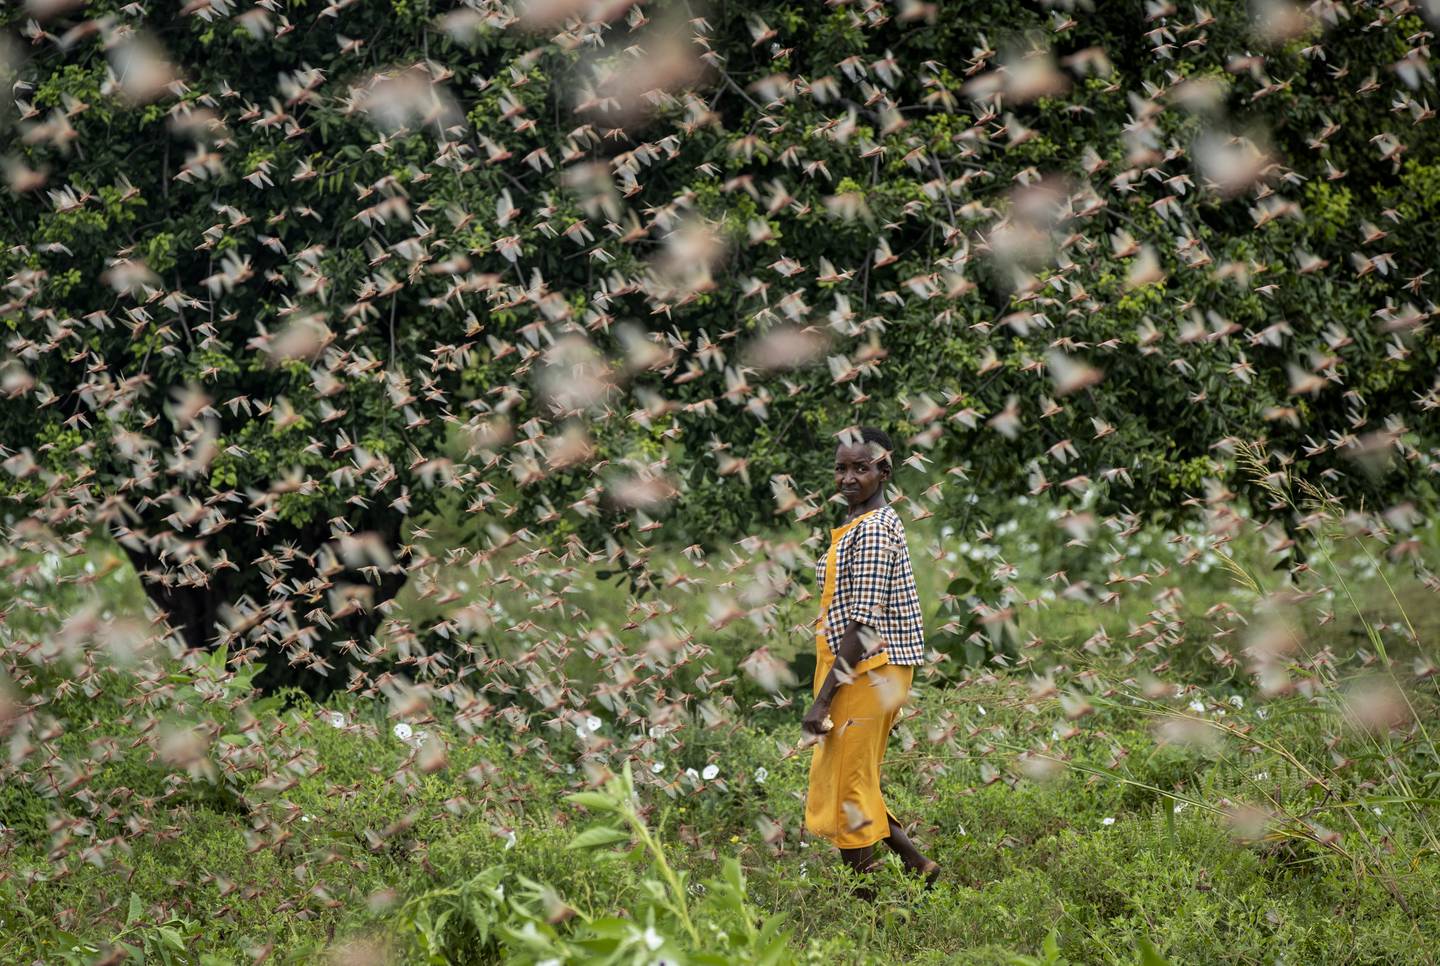 A farmer looks back as she walks through swarms of desert locusts feeding on her crops, in Katitika village, Kitui county, Kenya, Friday, Jan. 24, 2020. Desert locusts have swarmed into Kenya by the hundreds of millions from Somalia and Ethiopia, countries that haven't seen such numbers in a quarter-century, destroying farmland and threatening an already vulnerable region. (AP Photo/Ben Curtis)